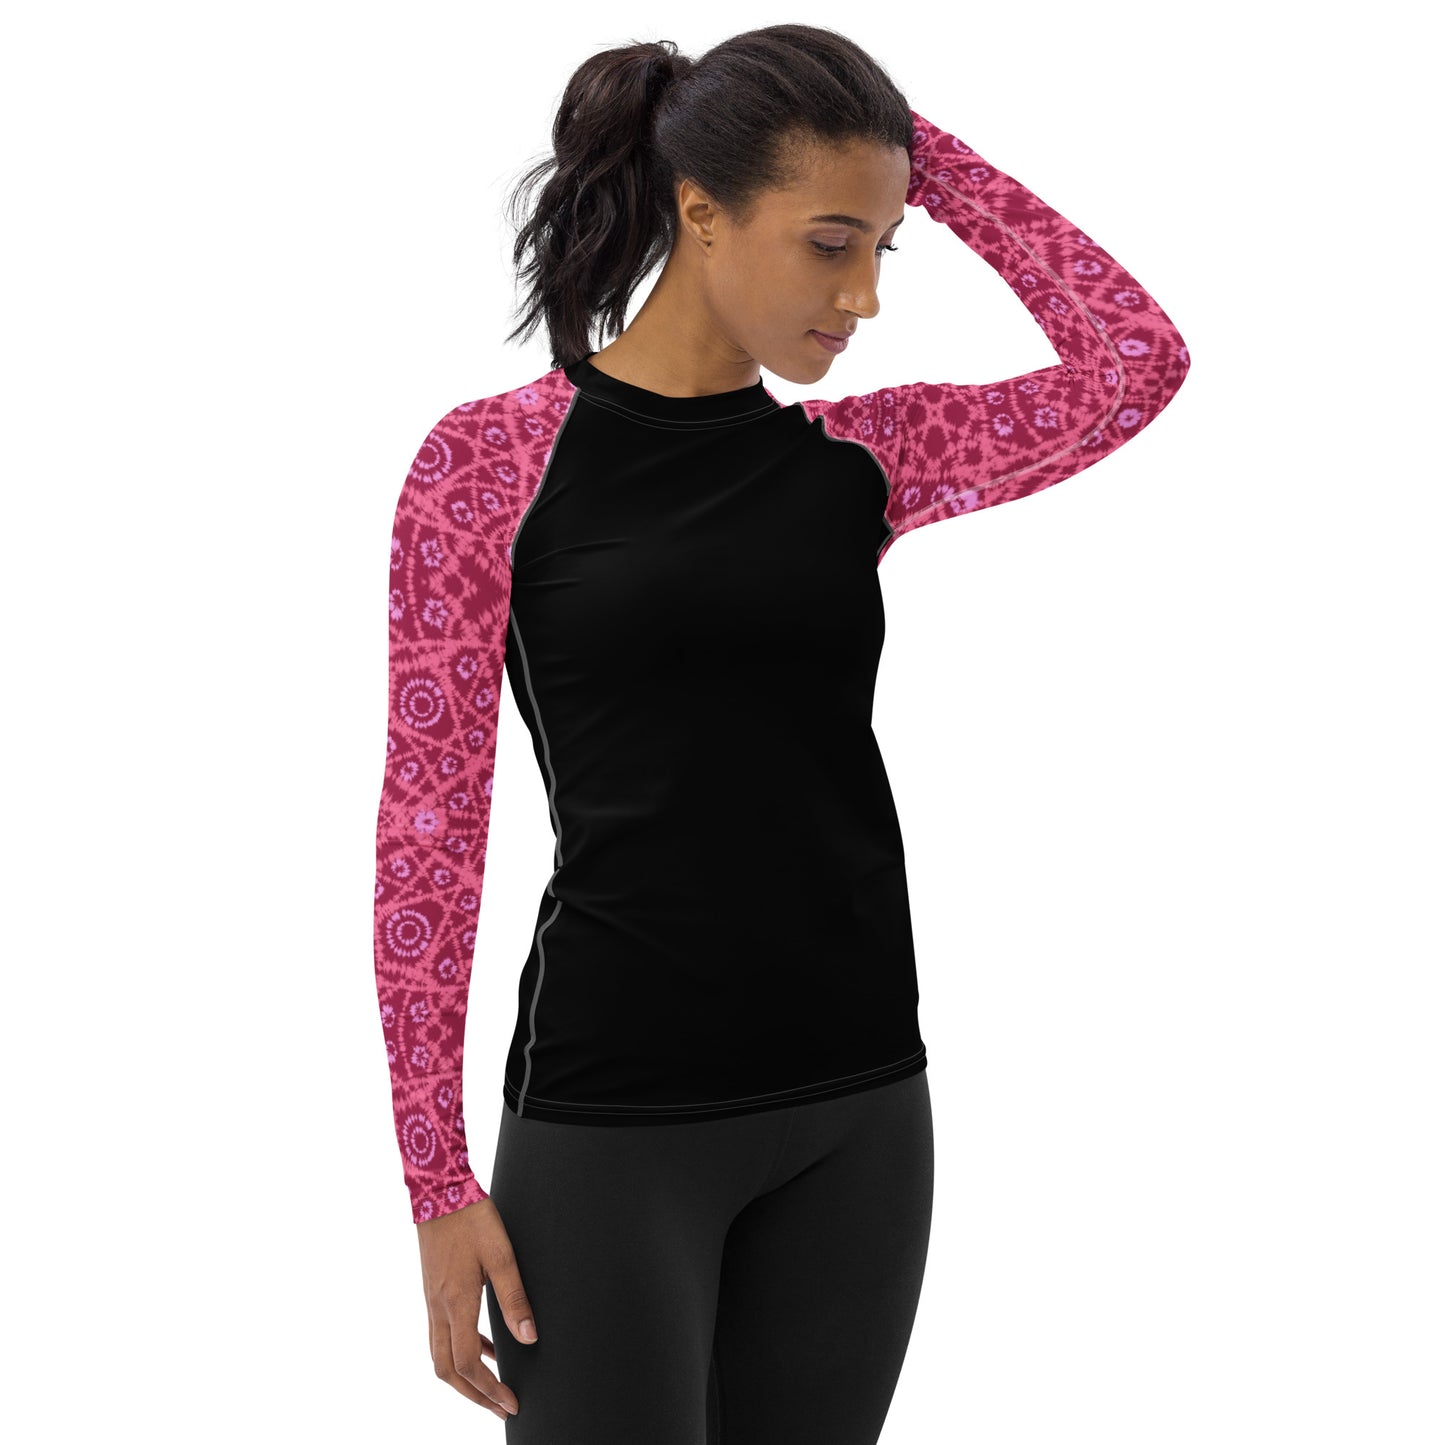 Batik - Red and Pink Sleeves and Black Body - Women's Rash Guard